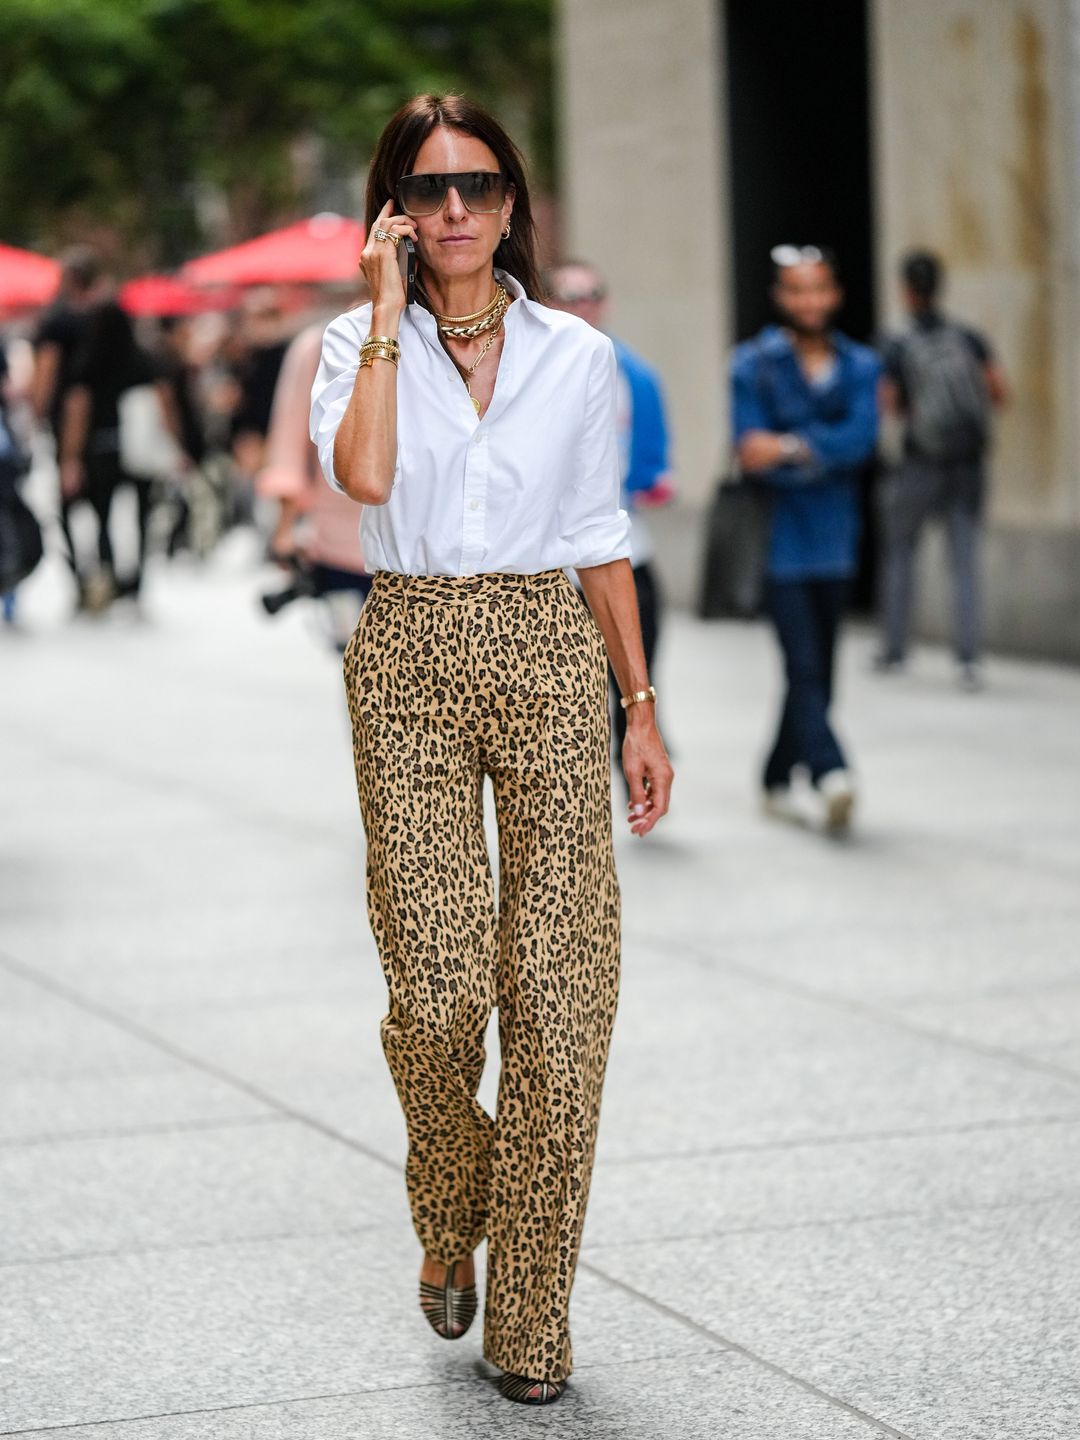 A fashion week guest teams a white shirt with leopard print trousers 